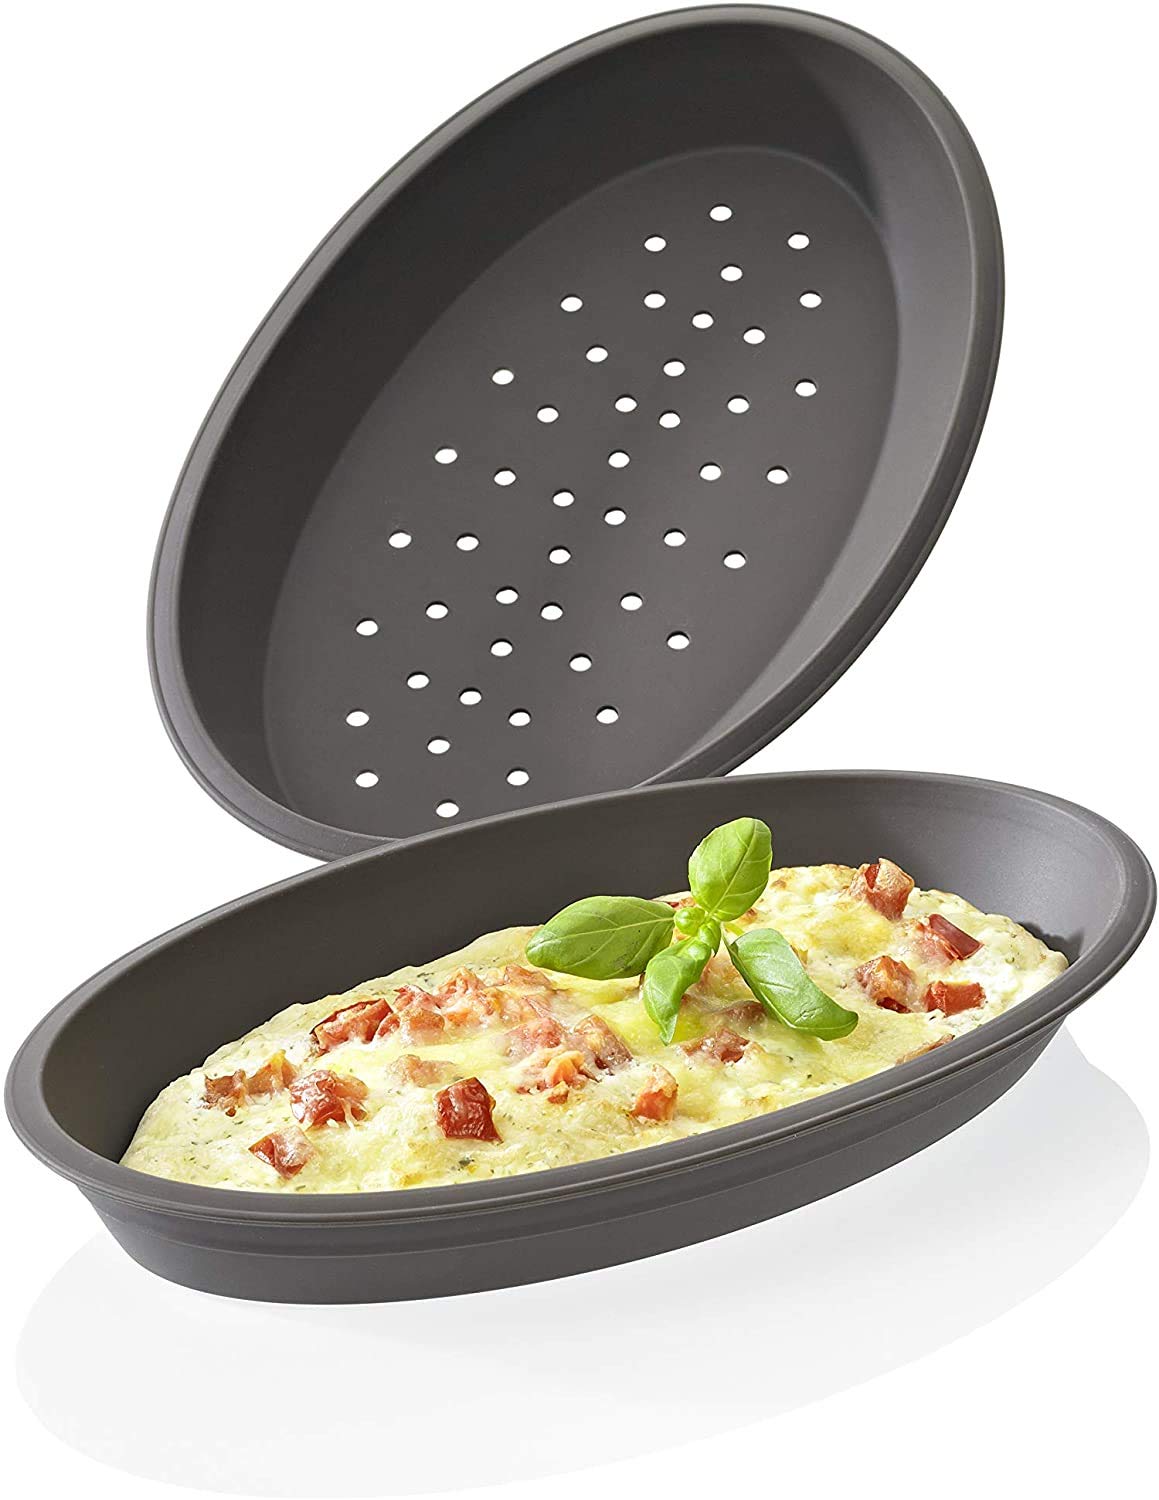 LURCH Germany Flexiform Silicone Oval Pizza Molds 9.8 x 5.9 inches - Set of 2 - Brown